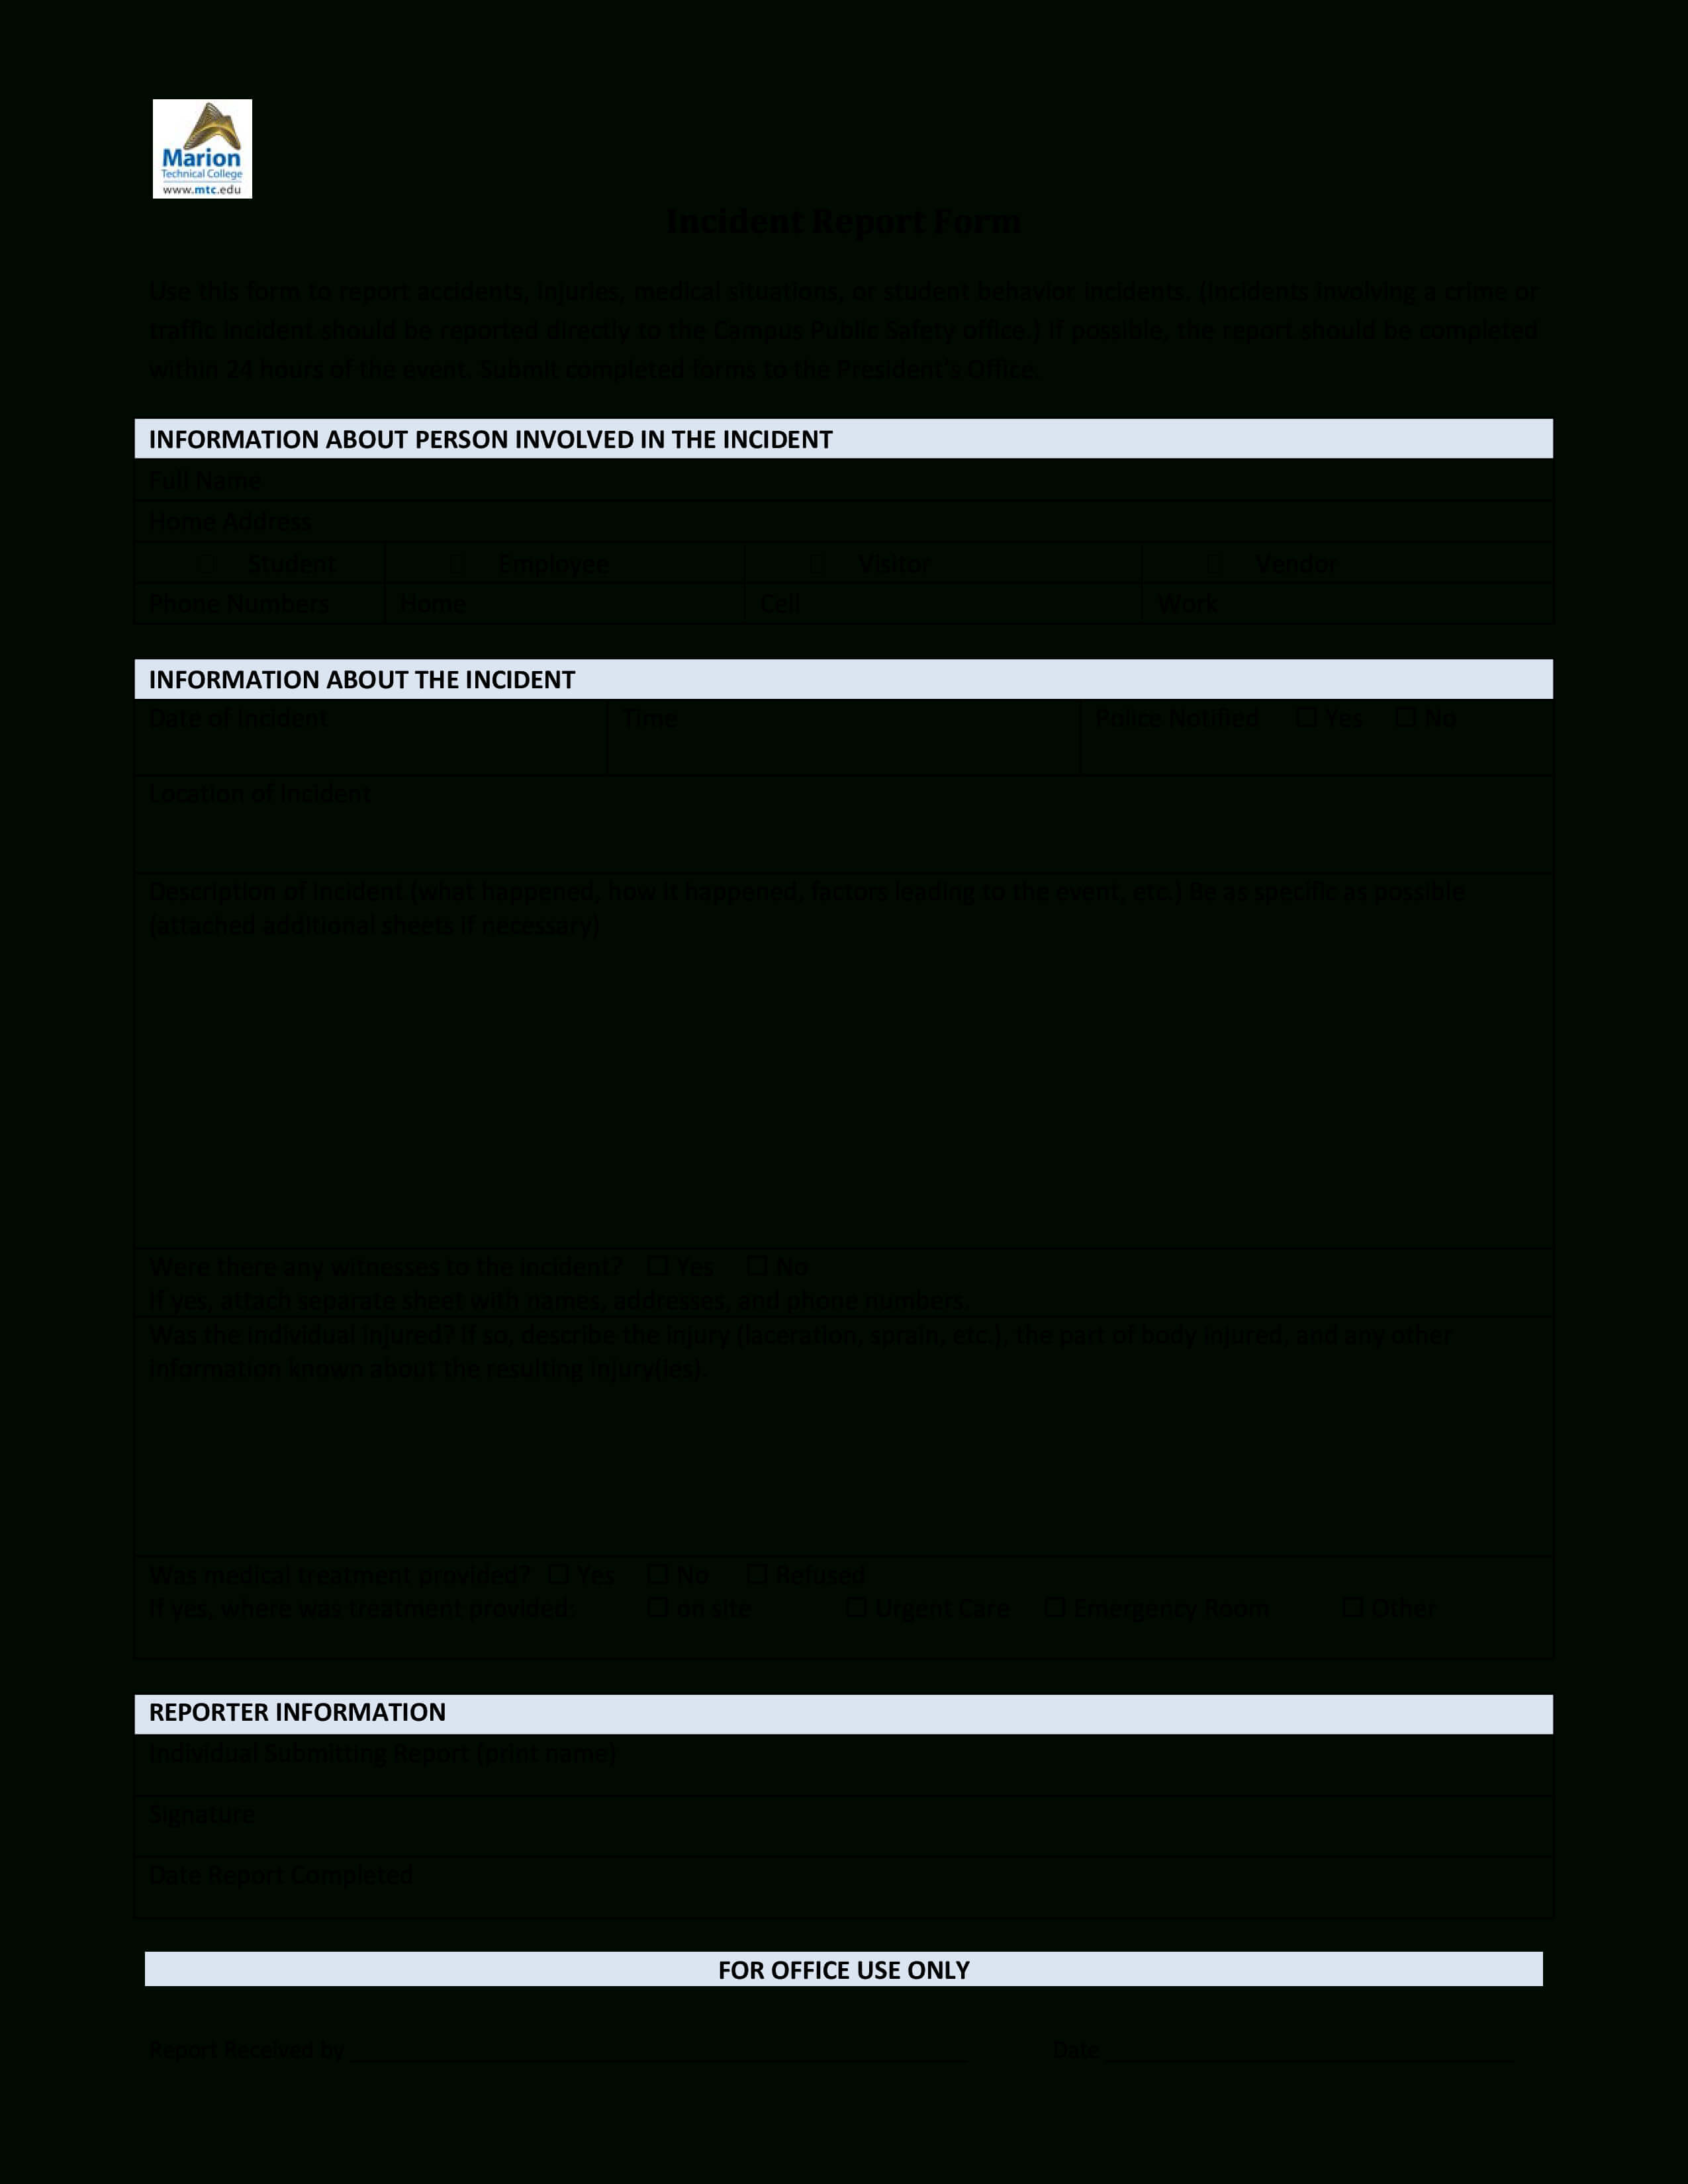 Blank Police Report | Templates At Allbusinesstemplates Throughout Blank Police Report Template